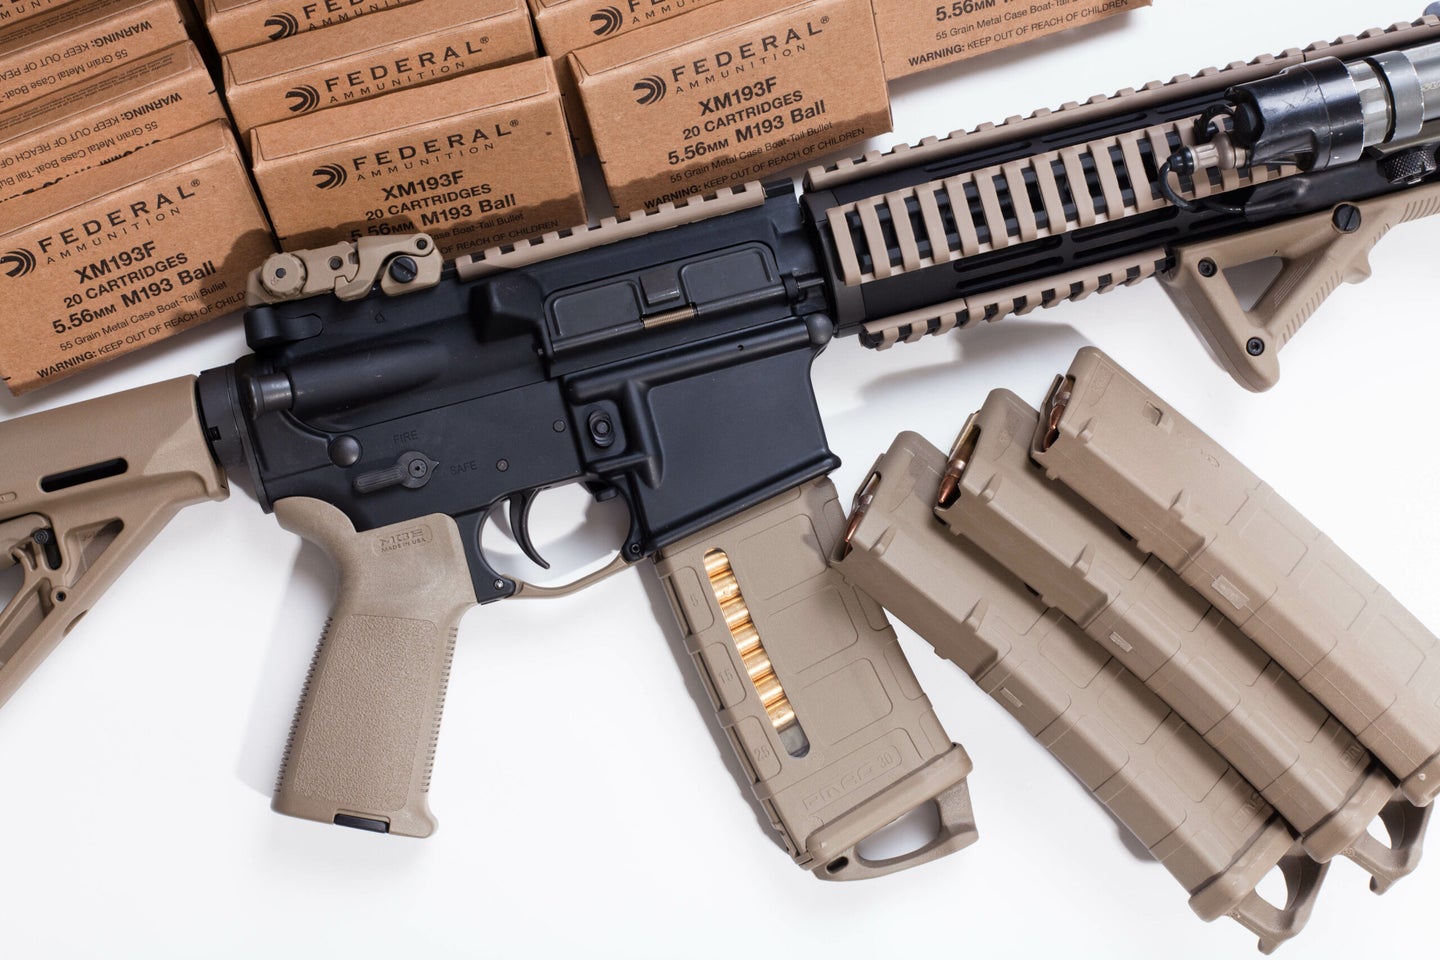 Looking for this furniture kit *Google image* : r/ar15